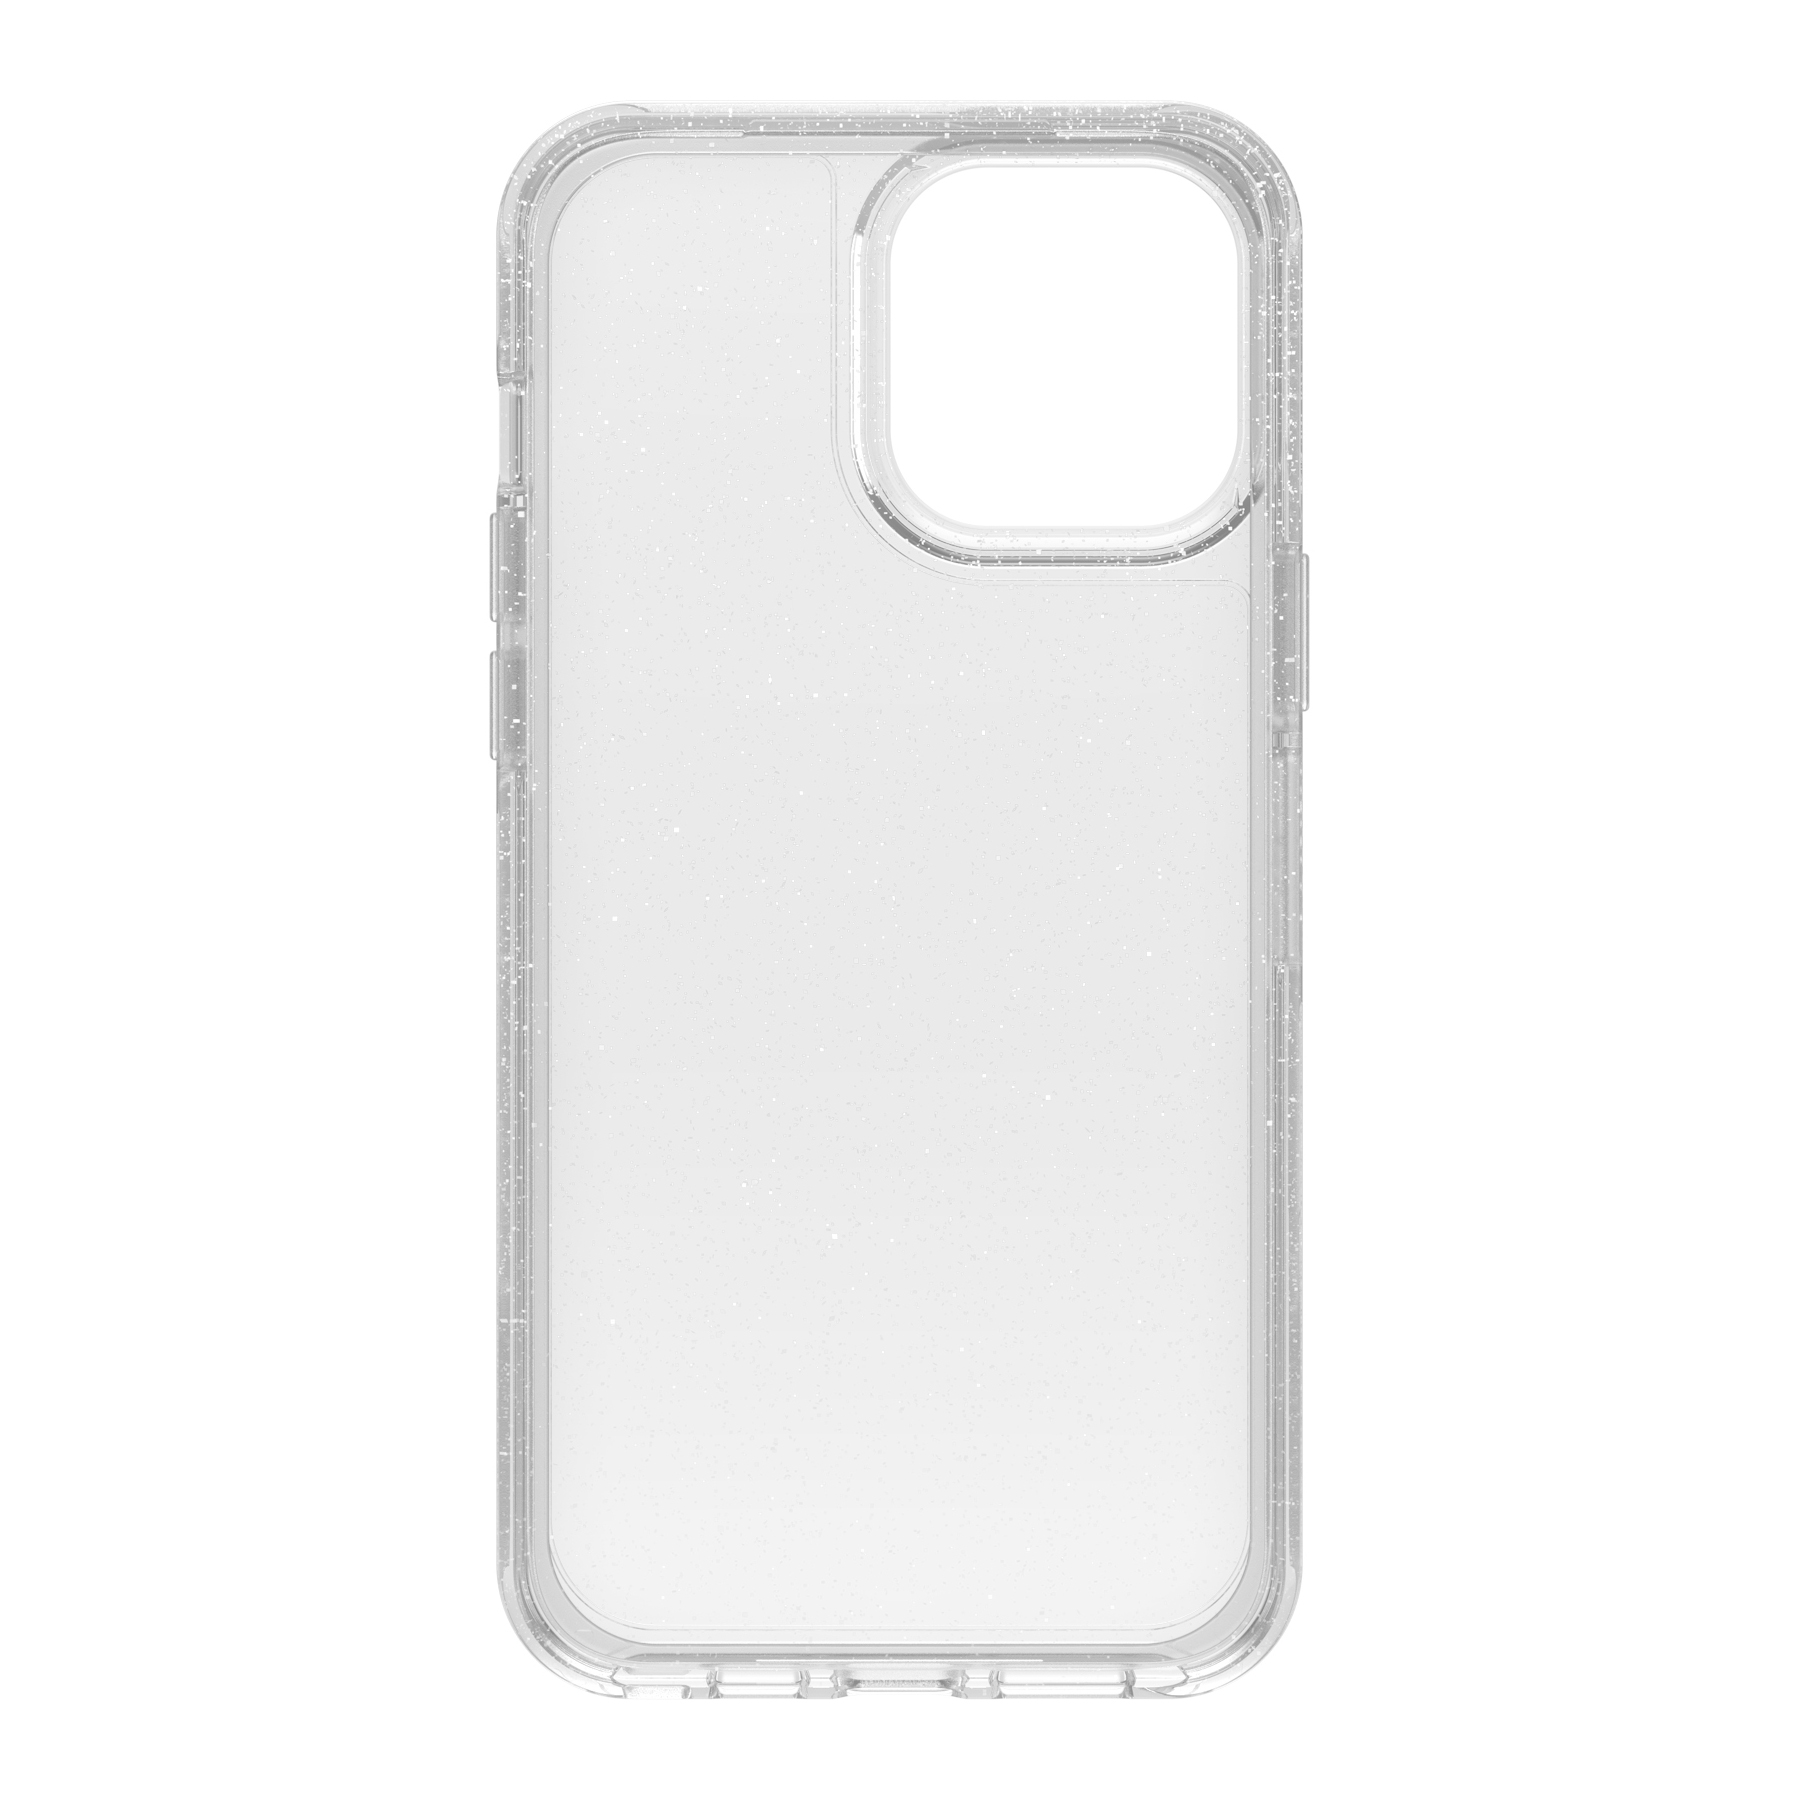 12/13 Symmetry OTTERBOX APPLE, PRO CLEAR Backcover, MAX, Clear, IPHONE